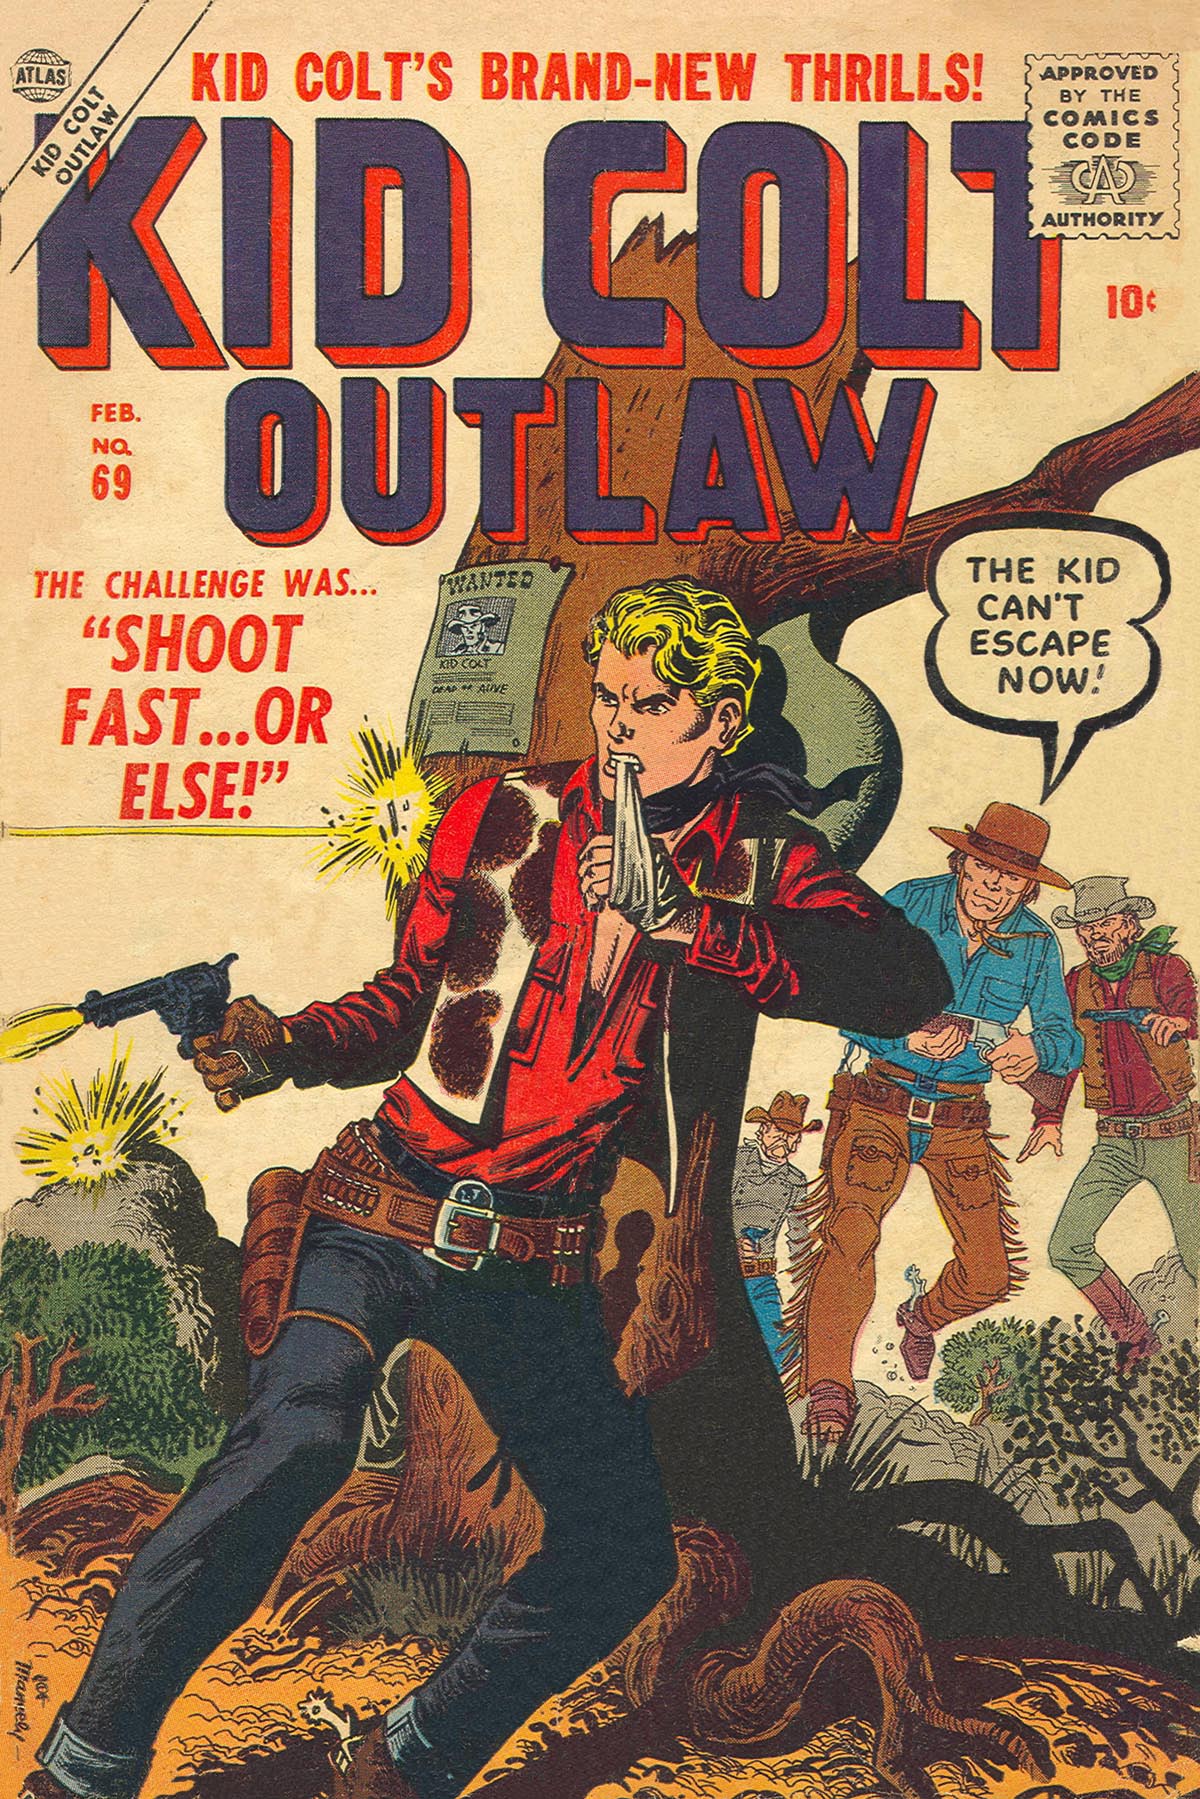 Read online Kid Colt Outlaw comic -  Issue #69 - 1